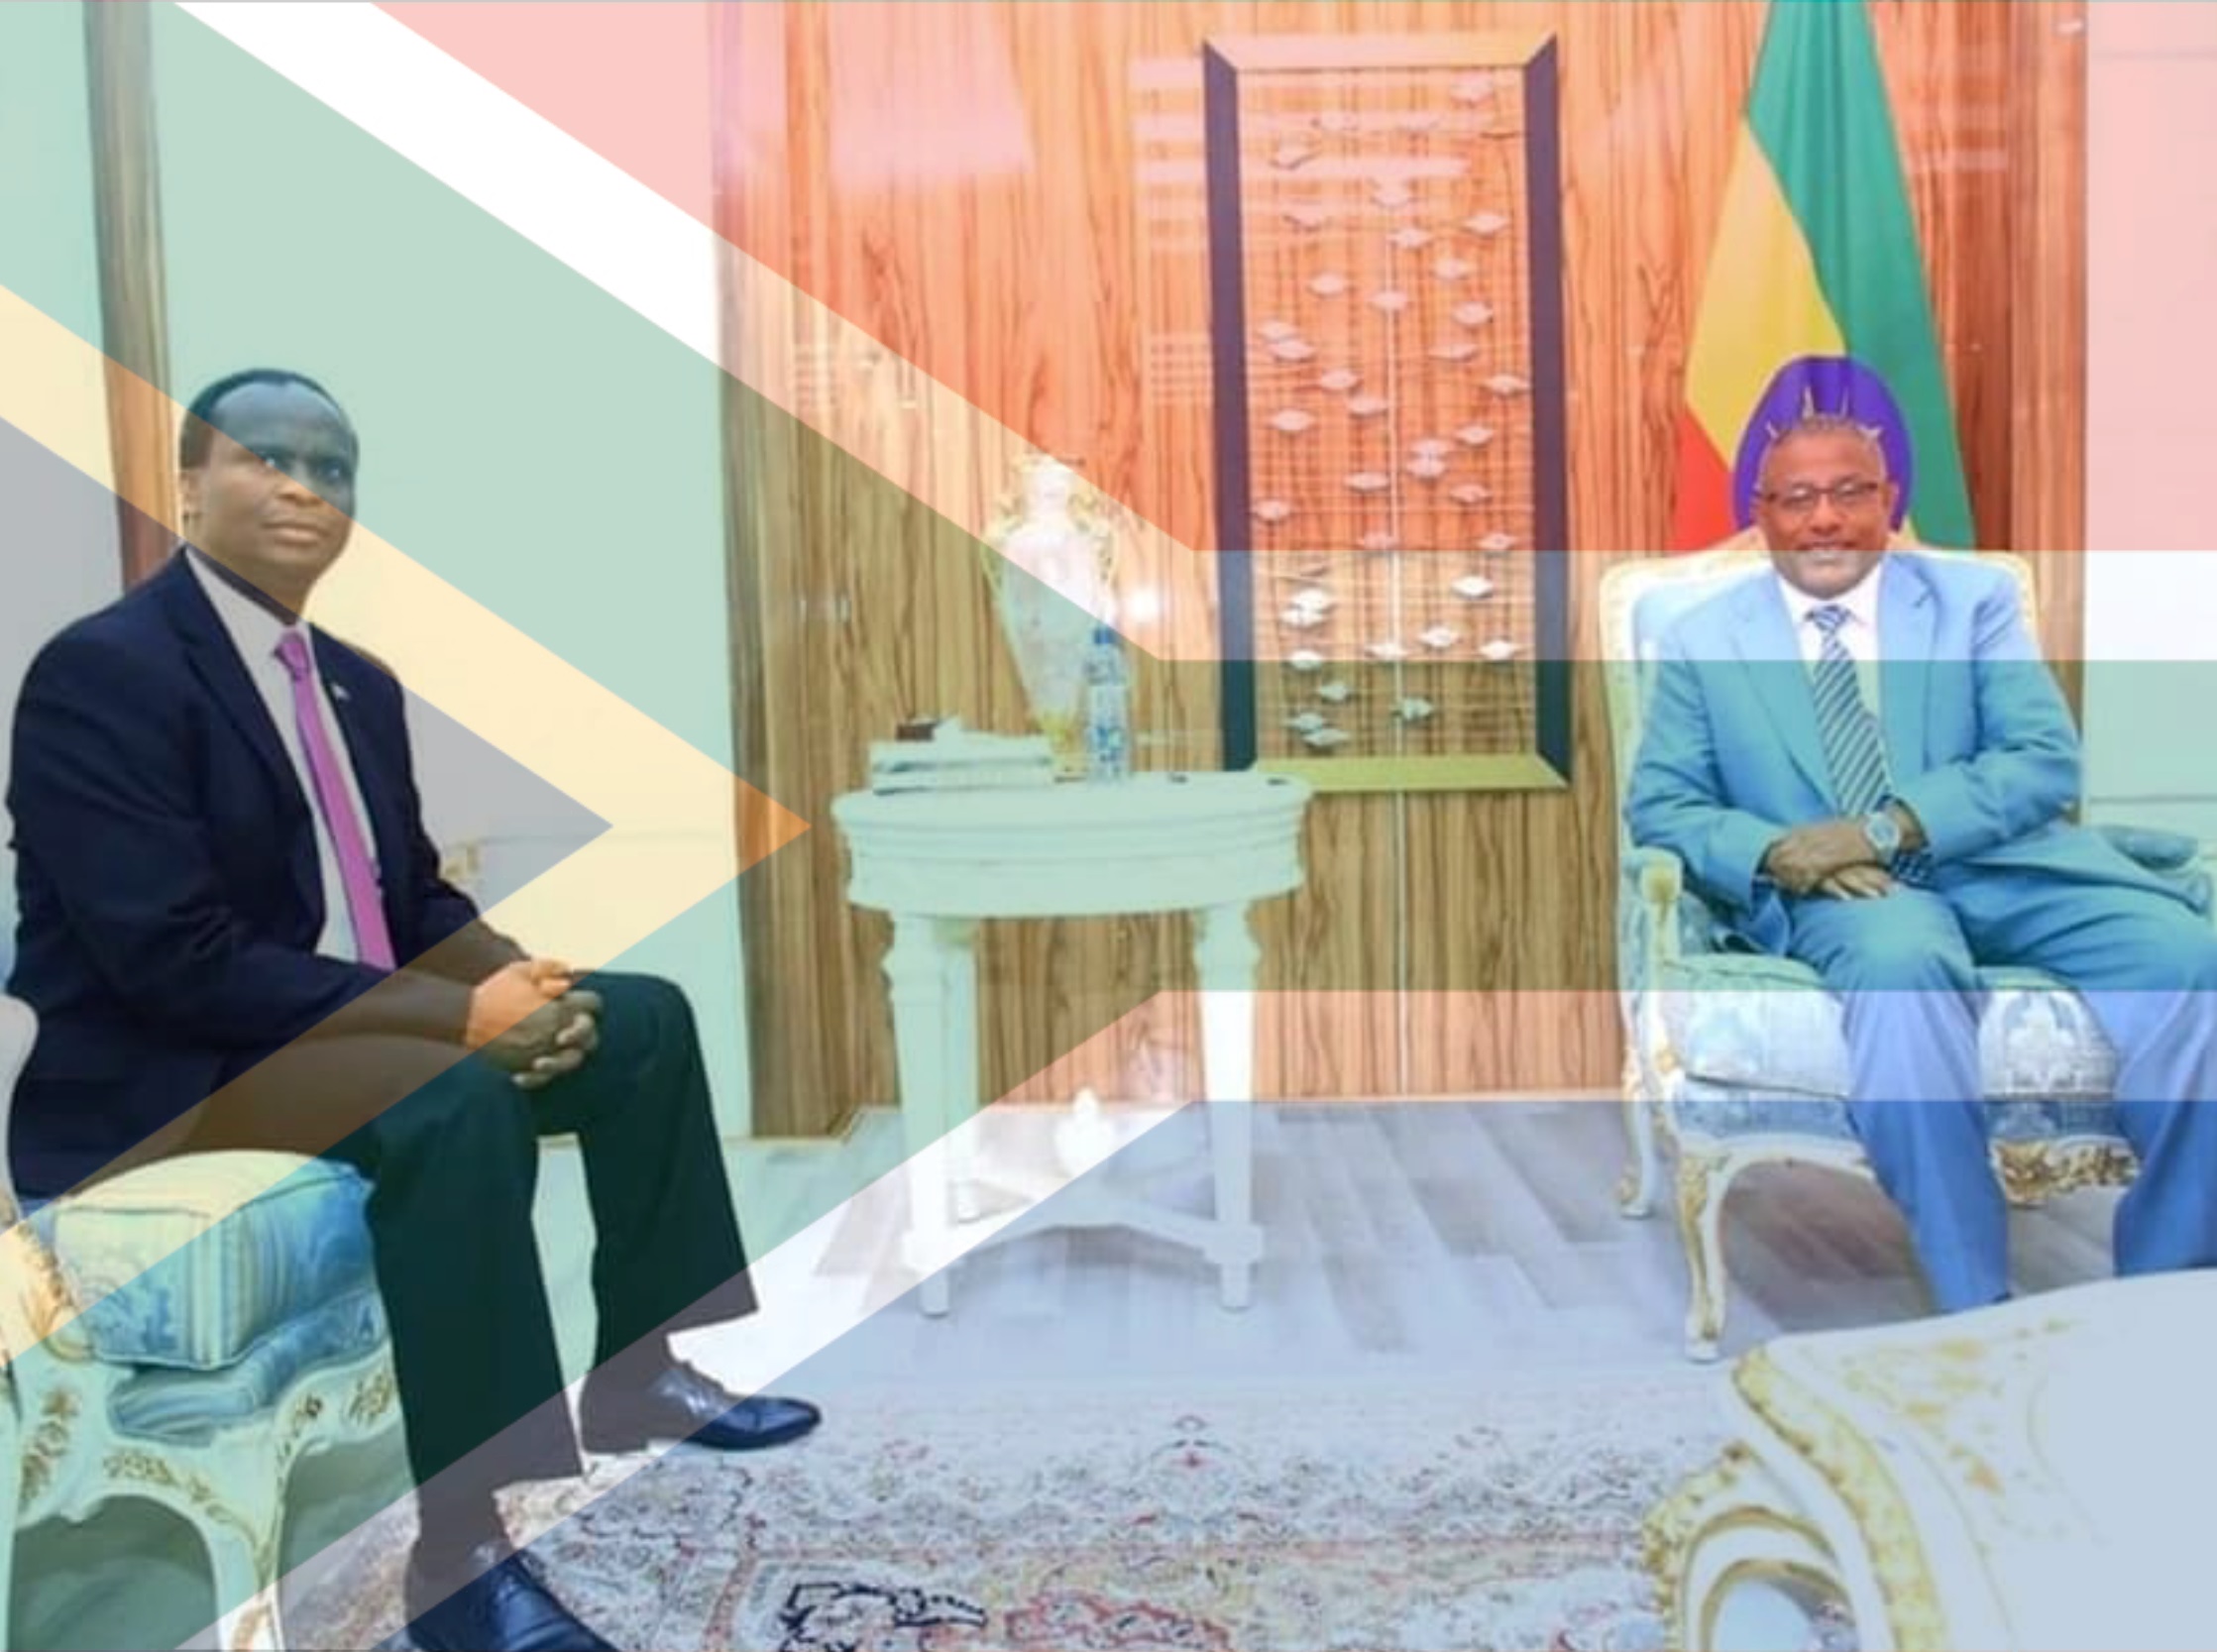 H.E Ambassador Edward Xolisa Makaya pays a courtesy visit to the Minister of Foreign Affairs of the Federal Democratic Republic of Ethiopia, H.E Gedu Andargachew 31 December 2019 